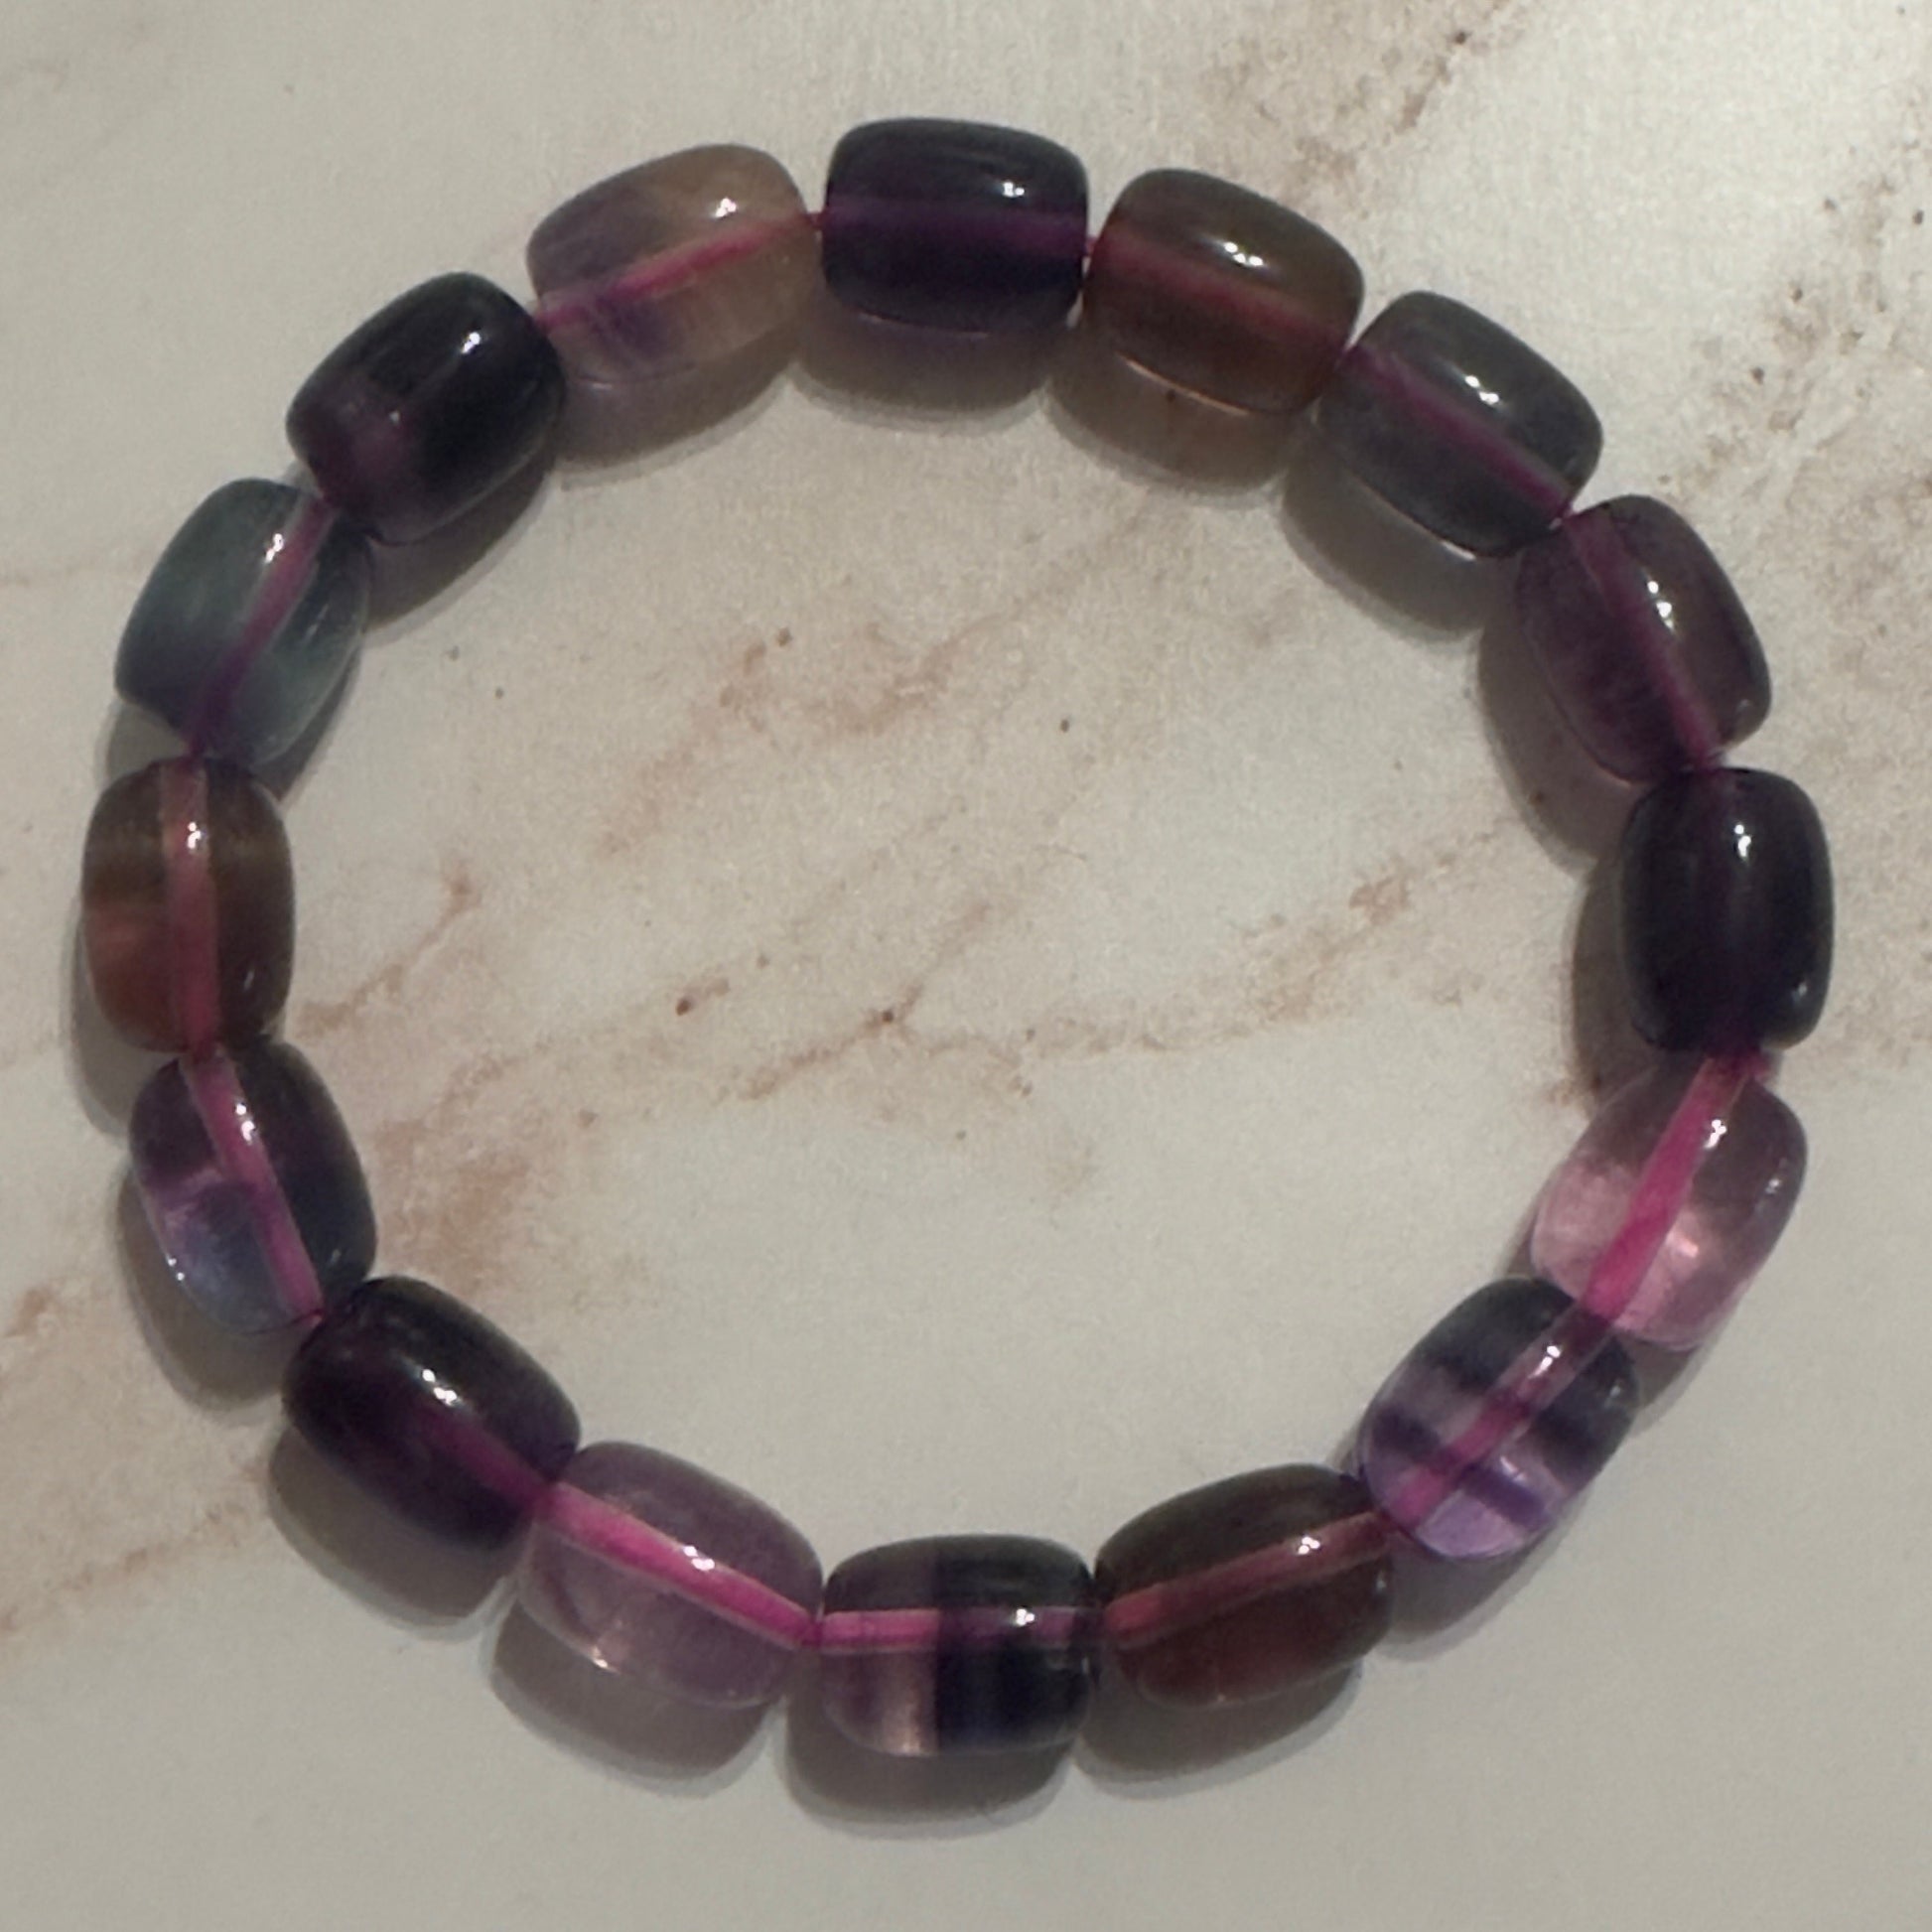 Barrel Fluorite Bracelet With Banding High-Quality Crystal Jewelry Beads in 8.8mm